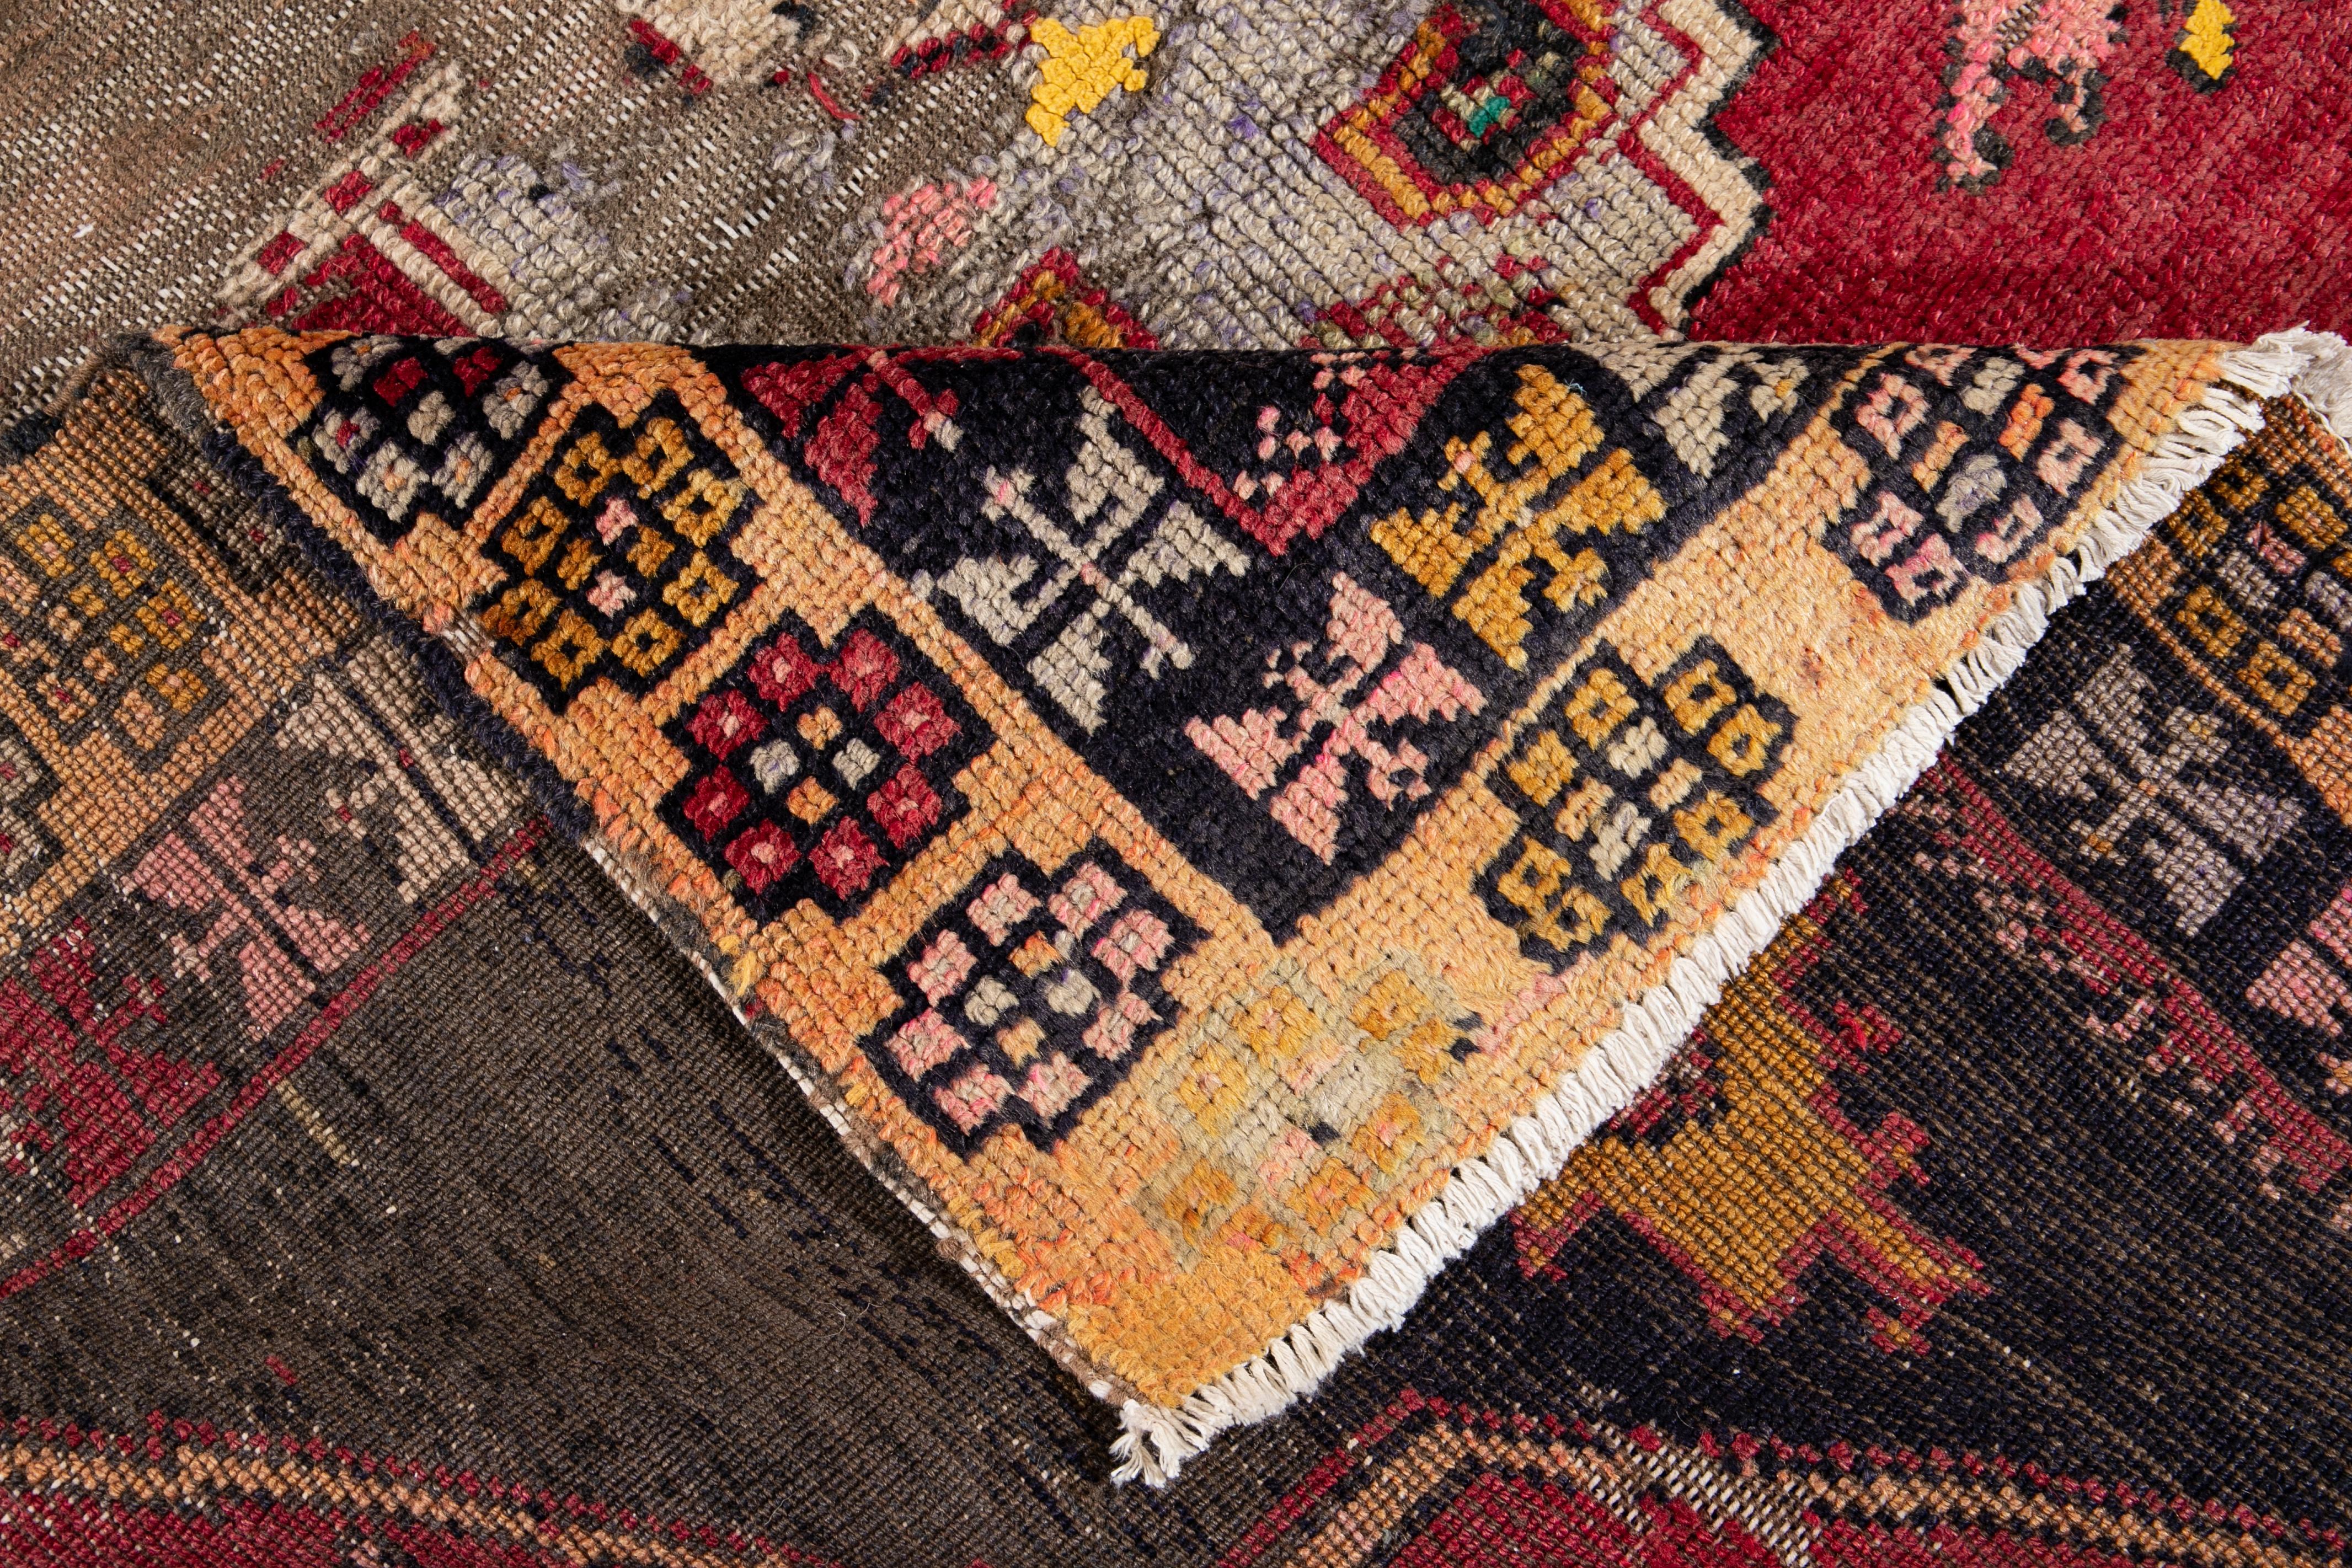 A hand knotted vintage Azeri runner with an artistic design on a red field, and multi-color accents throughout the piece.
This rug measures 5'3